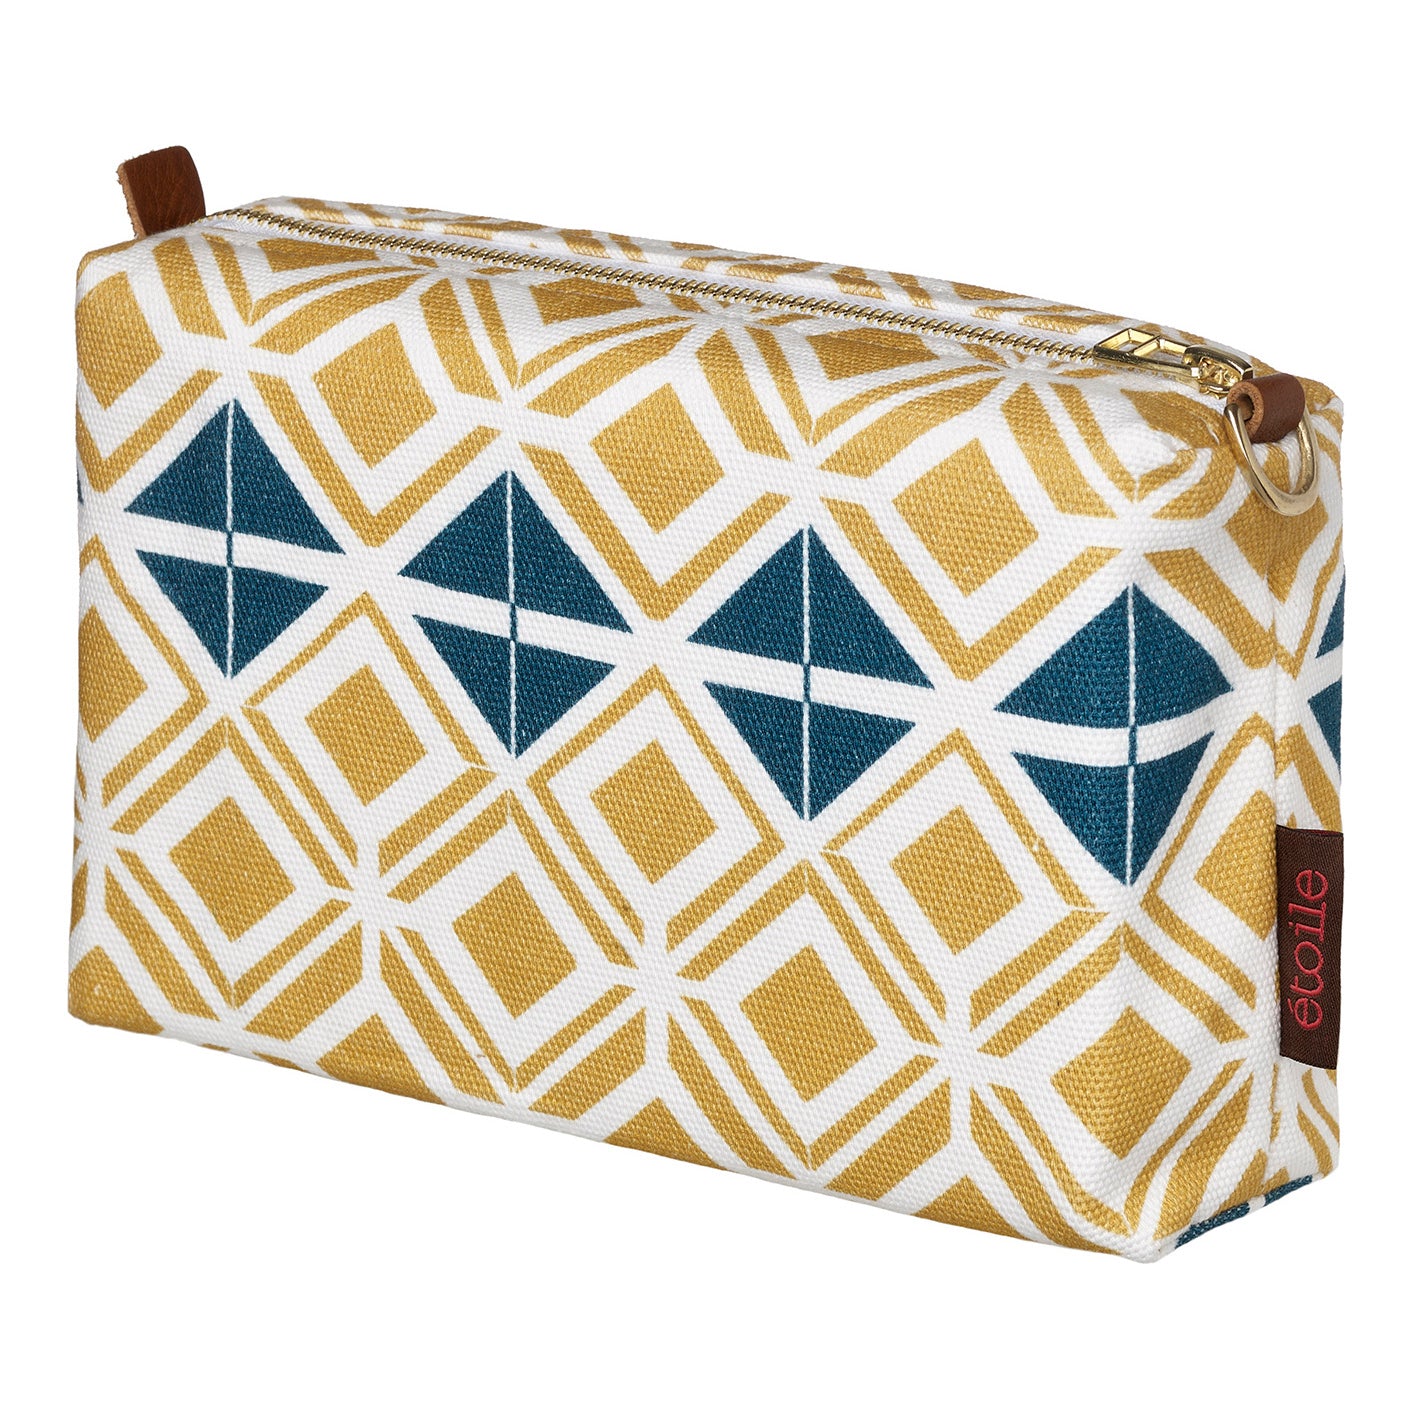 Glasswork Geometric Pattern Canvas Toiletry Travel Bag - Gold / Petrol Blue perfect for all your cosmetics, shaving, wash kit ships from Canada